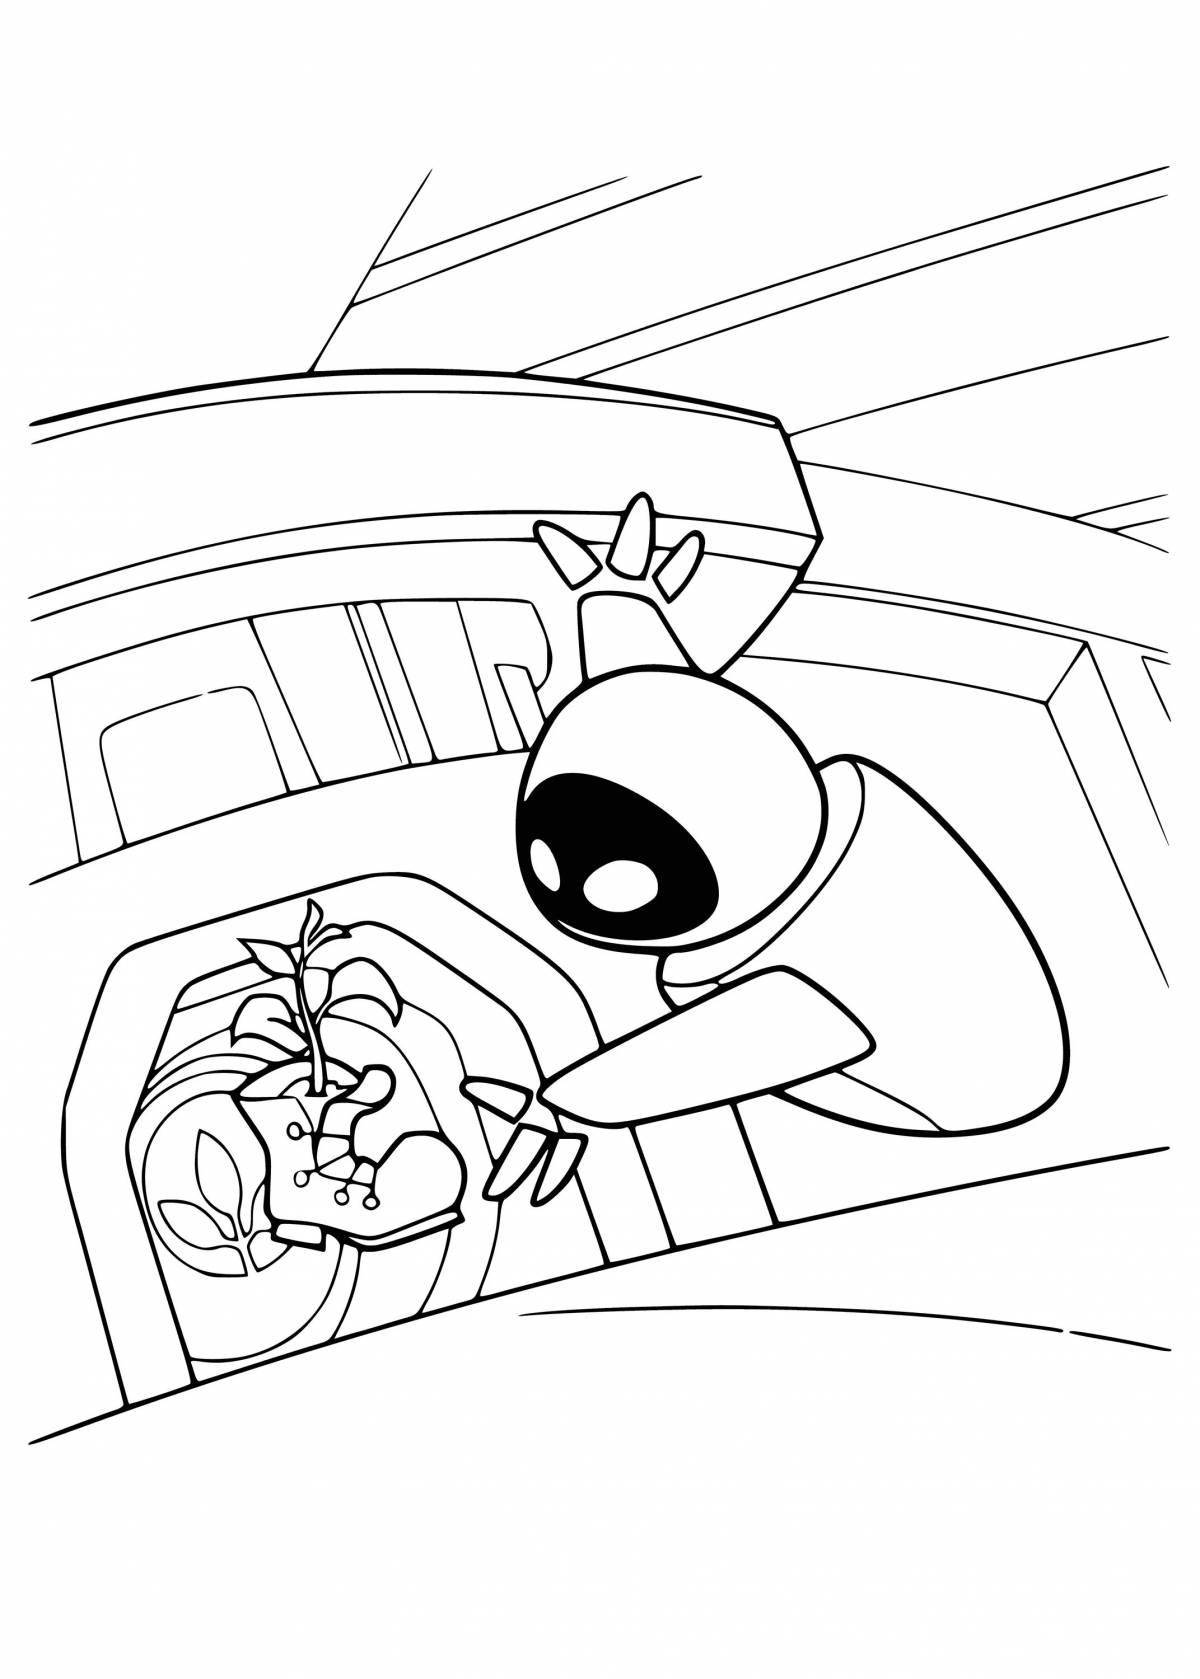 Glowing Wally and Eva coloring page